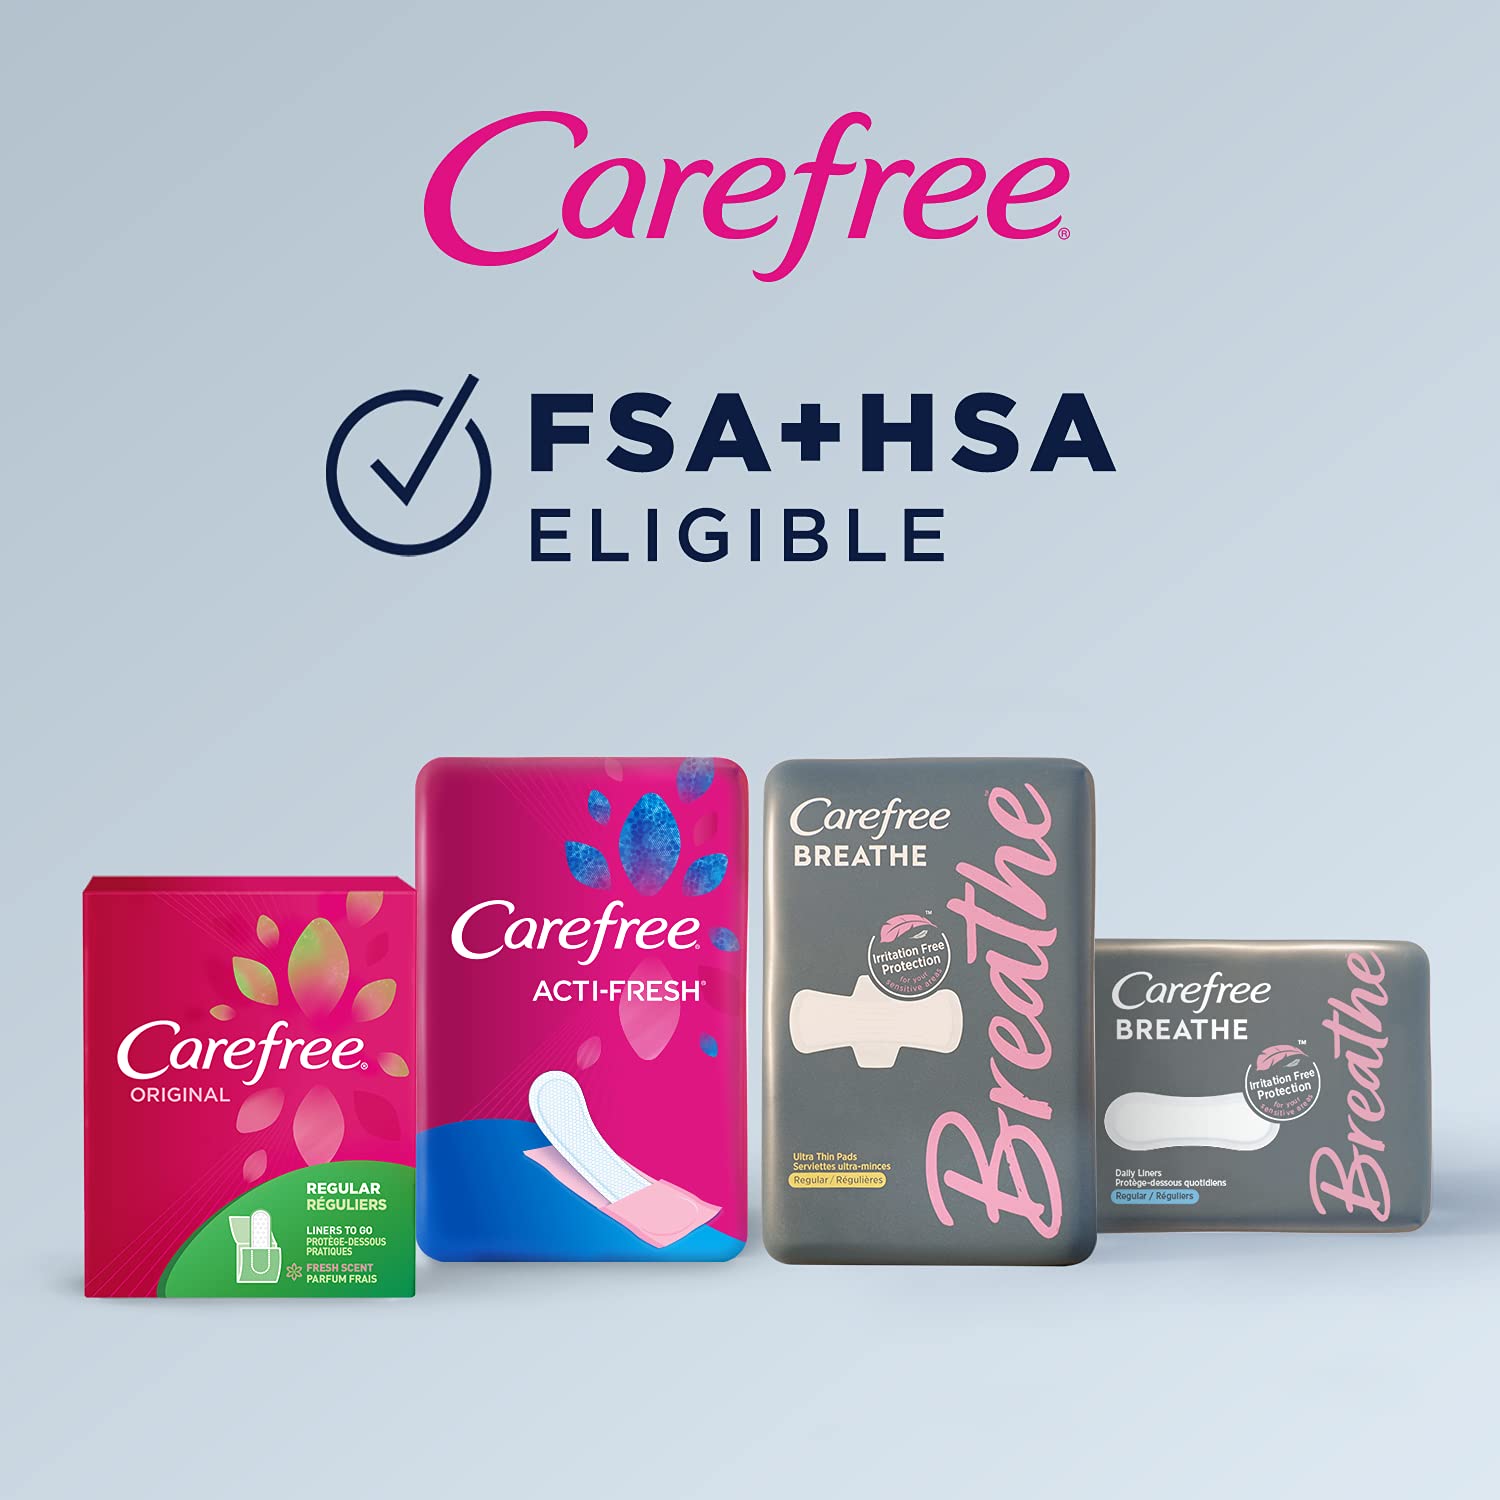 Carefree Acti-Fresh Panty Liners, Soft and Flexible Feminine Care Protection, Regular, 120 Count, (Package May vary)